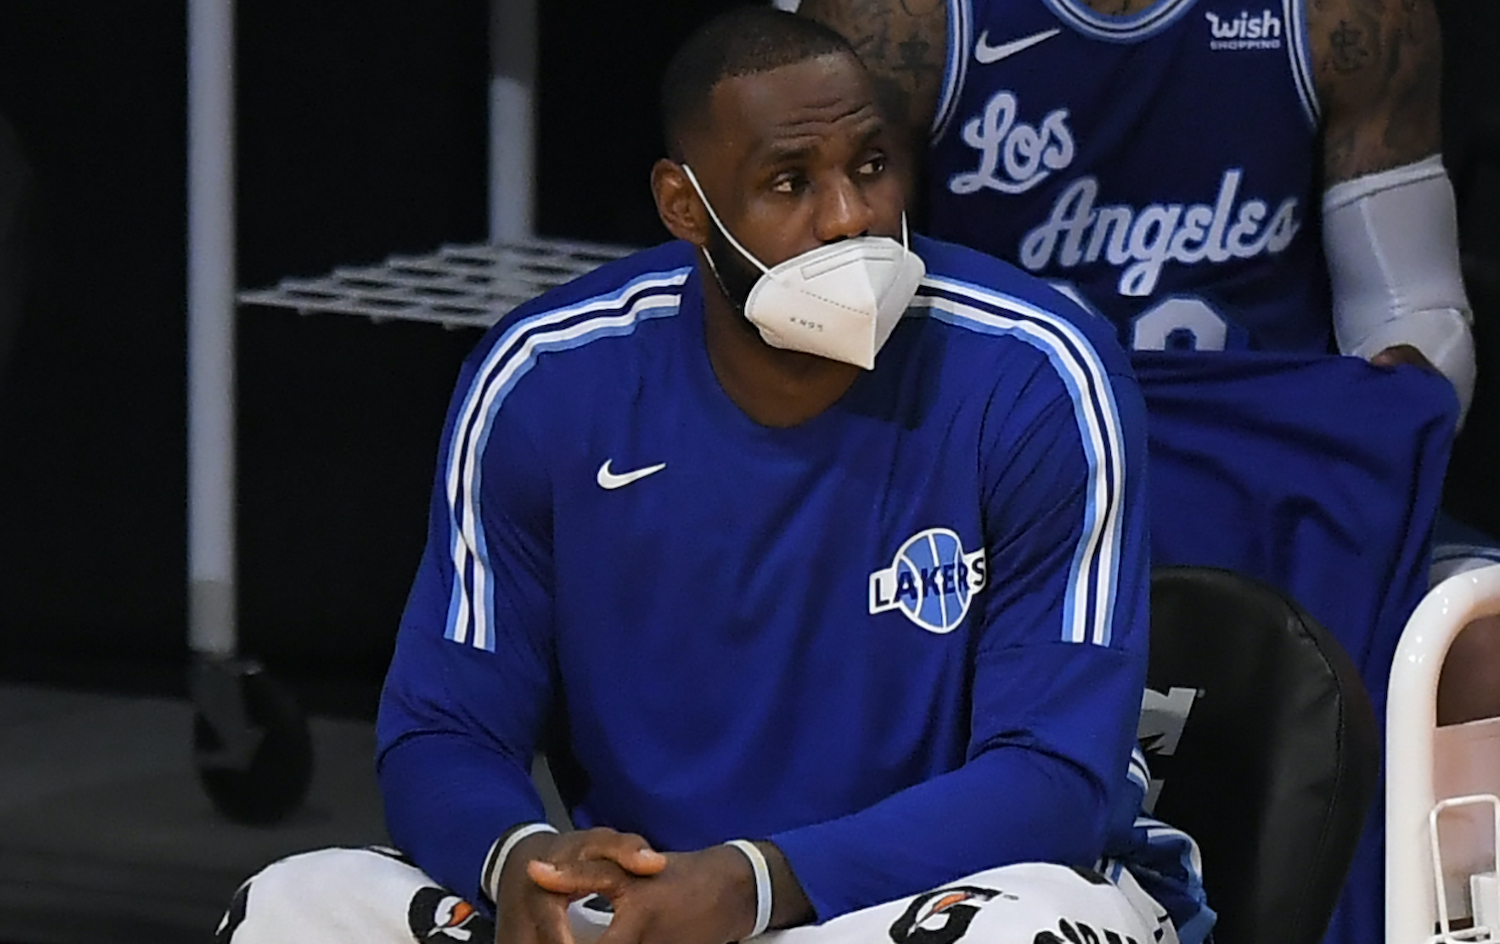 LOS ANGELES, CA - DECEMBER 27: LeBron James #23 of the Los Angeles Lakers wears a face mask on the bench in a game against the Minnesota Timberwolves at Staples Center on December 27, 2020 in Los Angeles, California. NOTE TO USER: User expressly acknowledges and agrees that, by downloading and/or using this photograph, user is consenting to the terms and conditions of the Getty aImages License Agreement. (Photo by John McCoy/Getty Images)